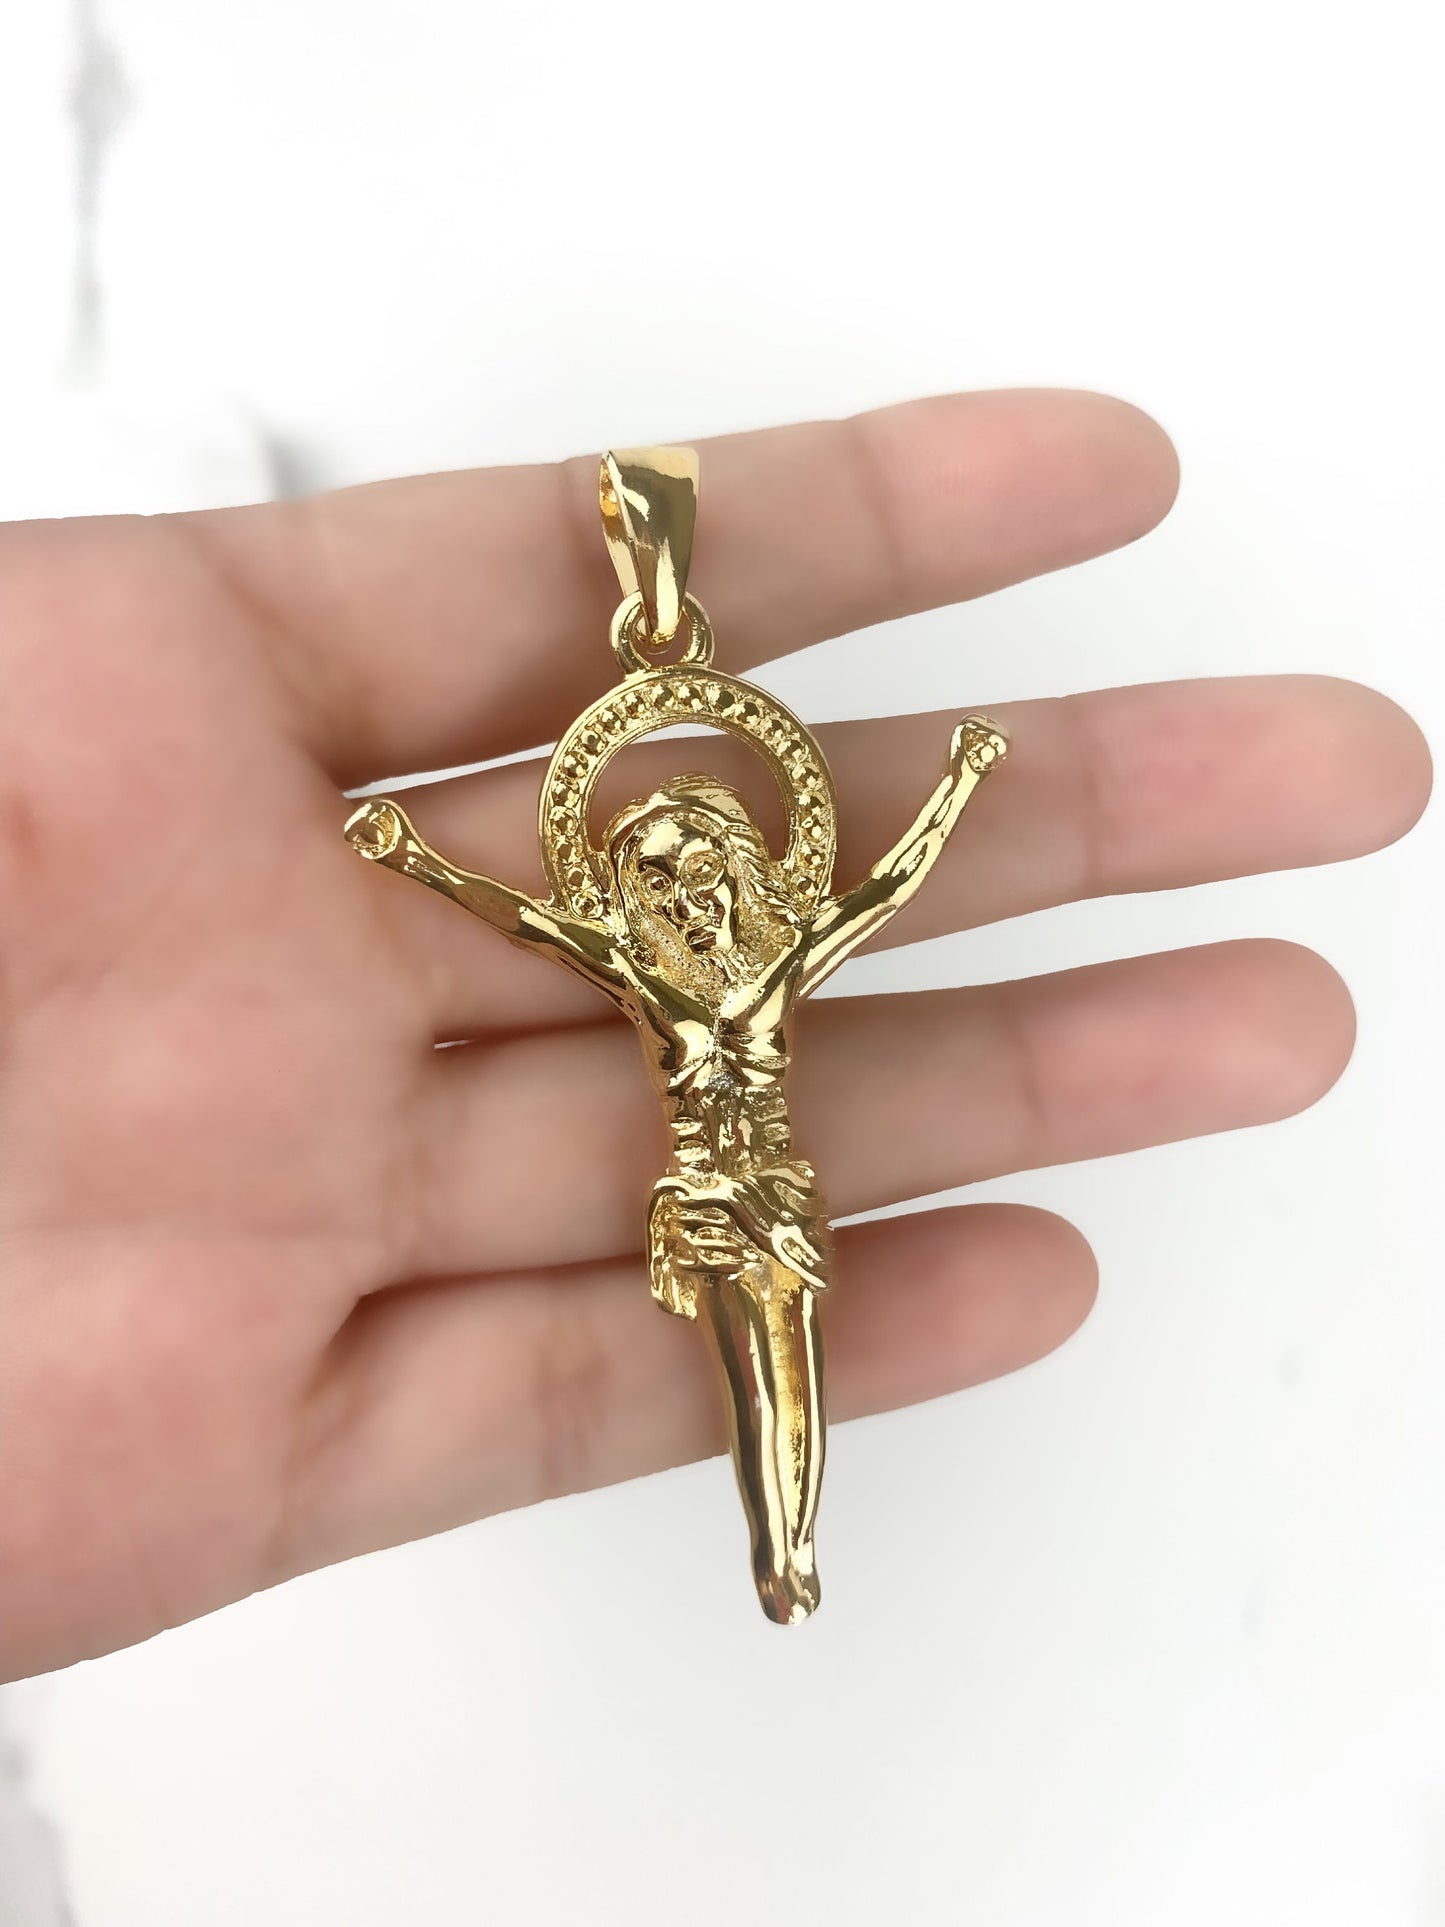 18k Gold Filled Floating Jesus Body Crucifix, Pendant Charms, Religious Jewelry, Wholesale Jewelry Making Supplies